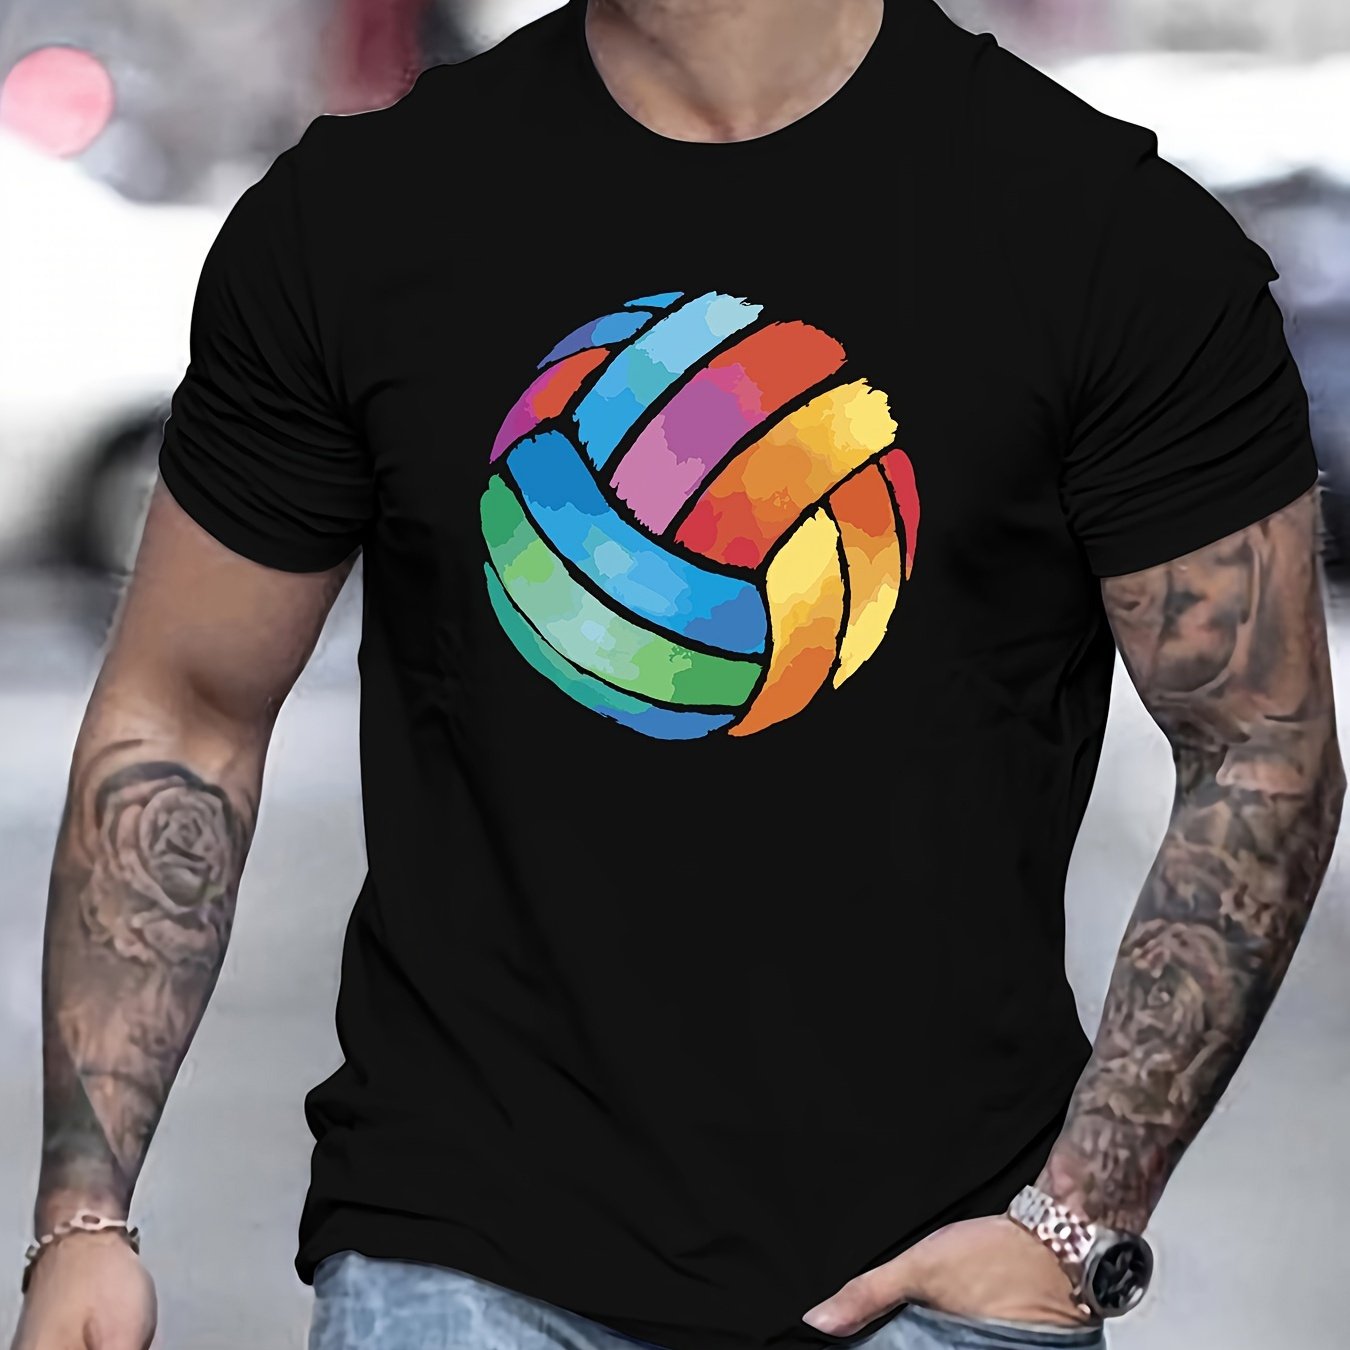 

Watercolor Volleyball Illustration Print Men's Cotton T-shirt, Casual Short Sleeve Crew Neck Top, Men's Summer Clothing